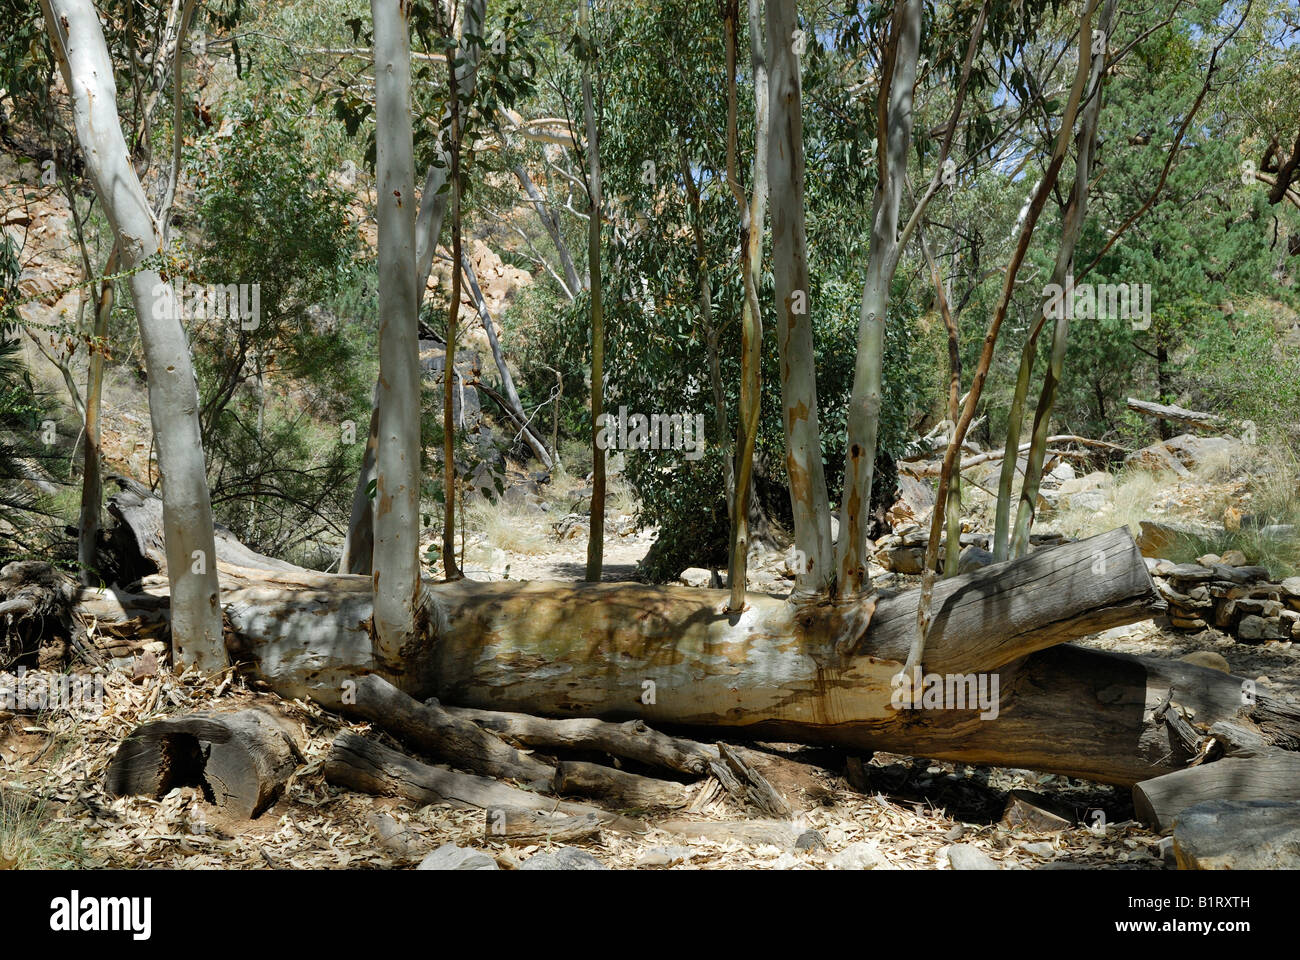 Felled Eucalyptus tree sprouting new limbs, Sandley Chasm, West MacDonnell Ranges, Northern Territory, Australia Stock Photo